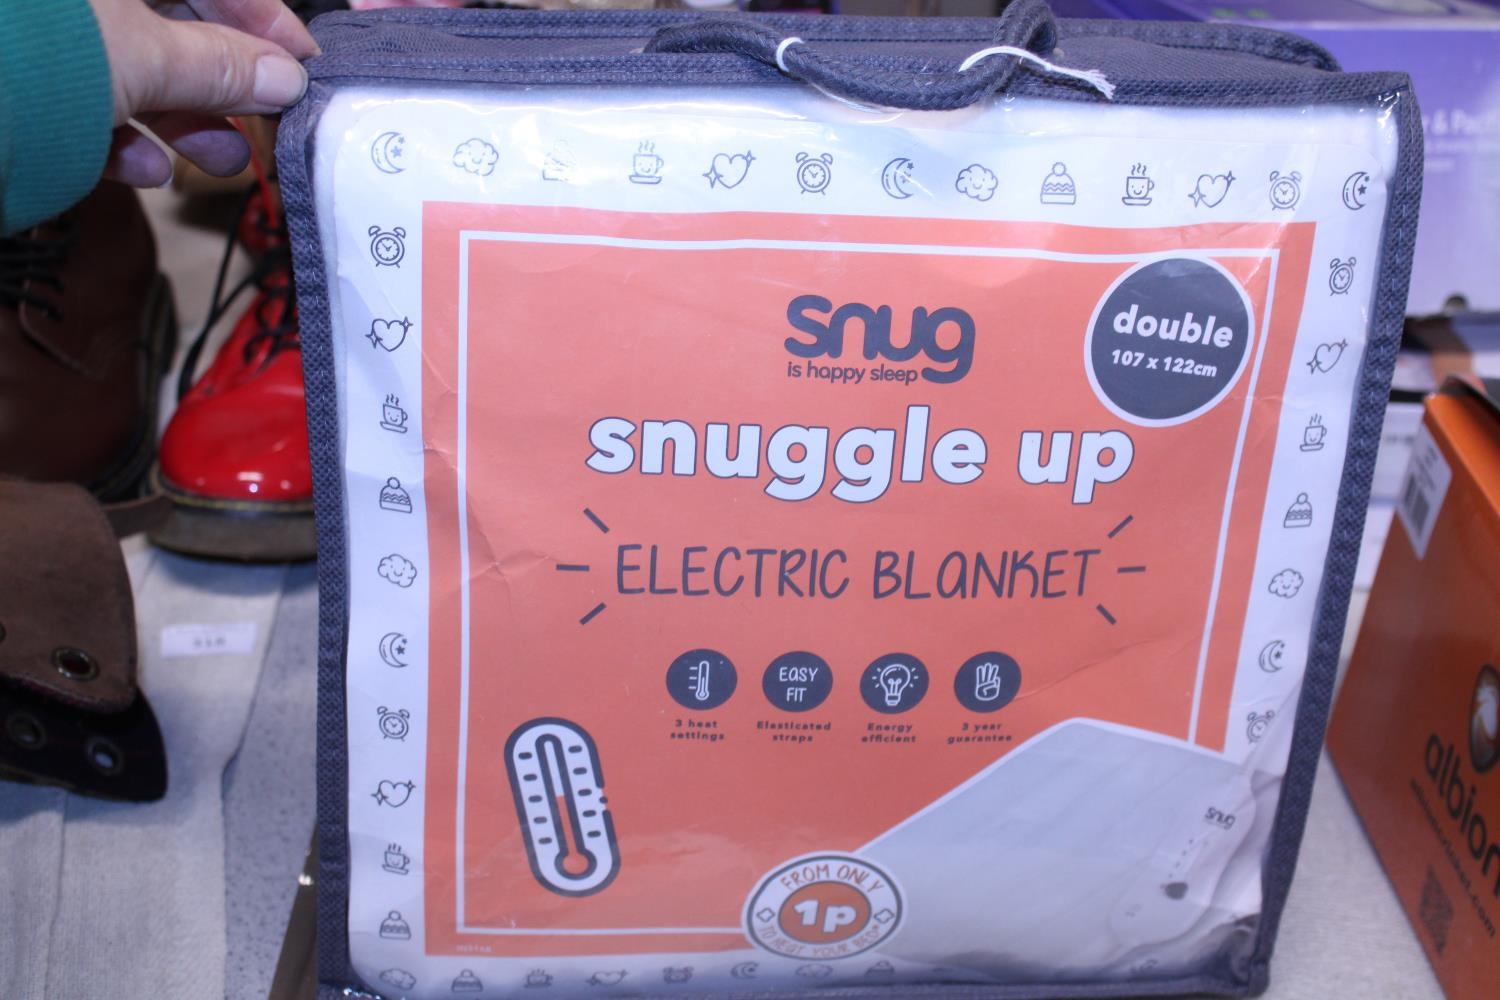 A new Snug electric blanket (untested)